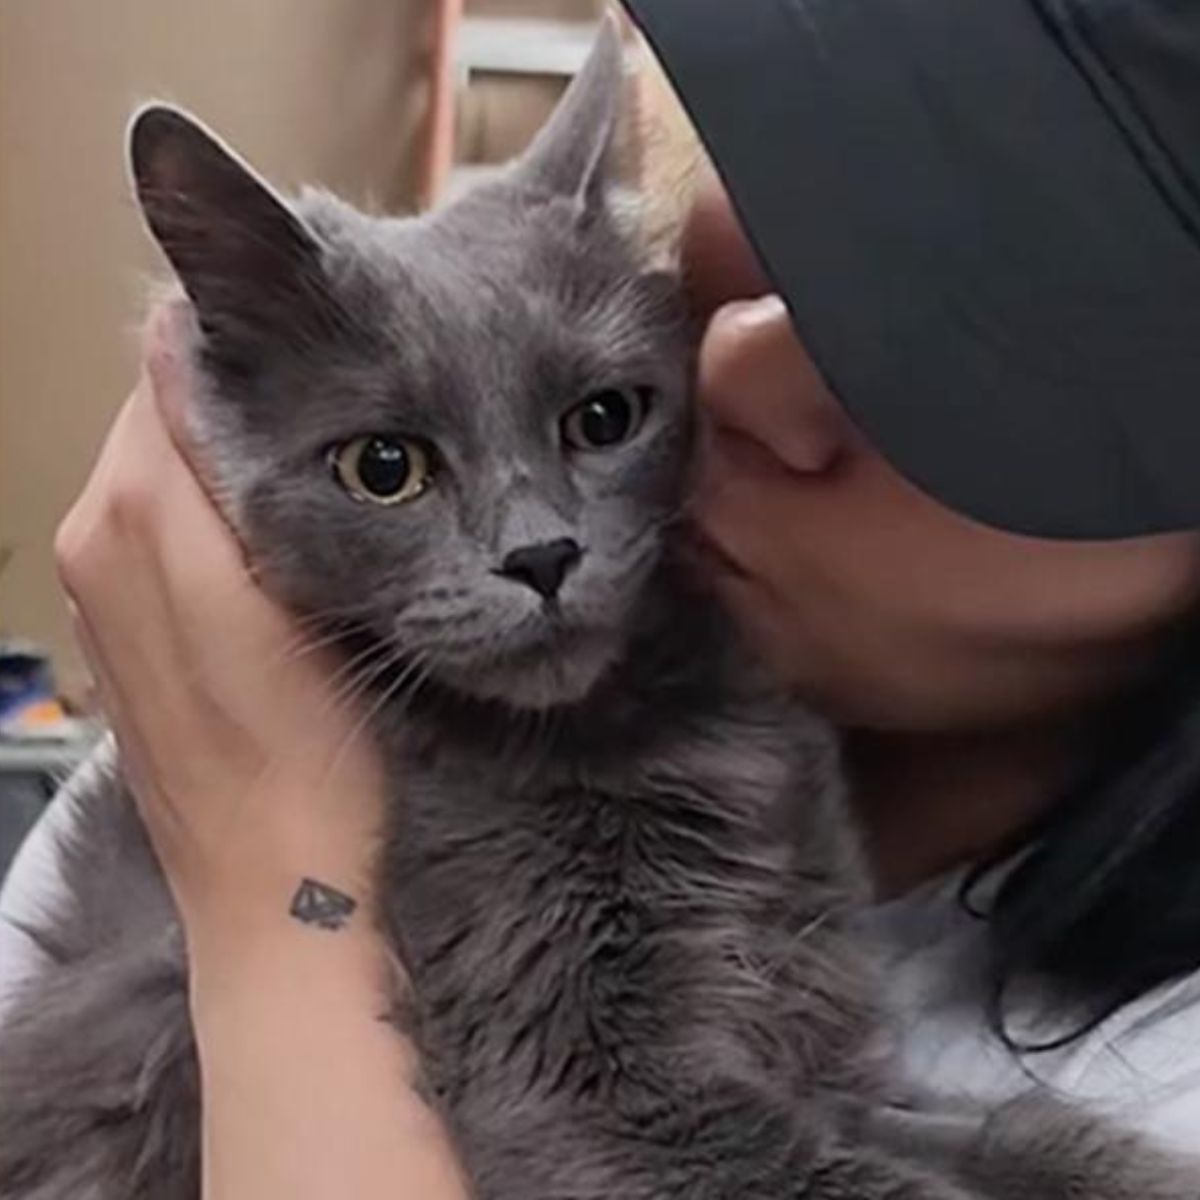 woman with hat kissing cat